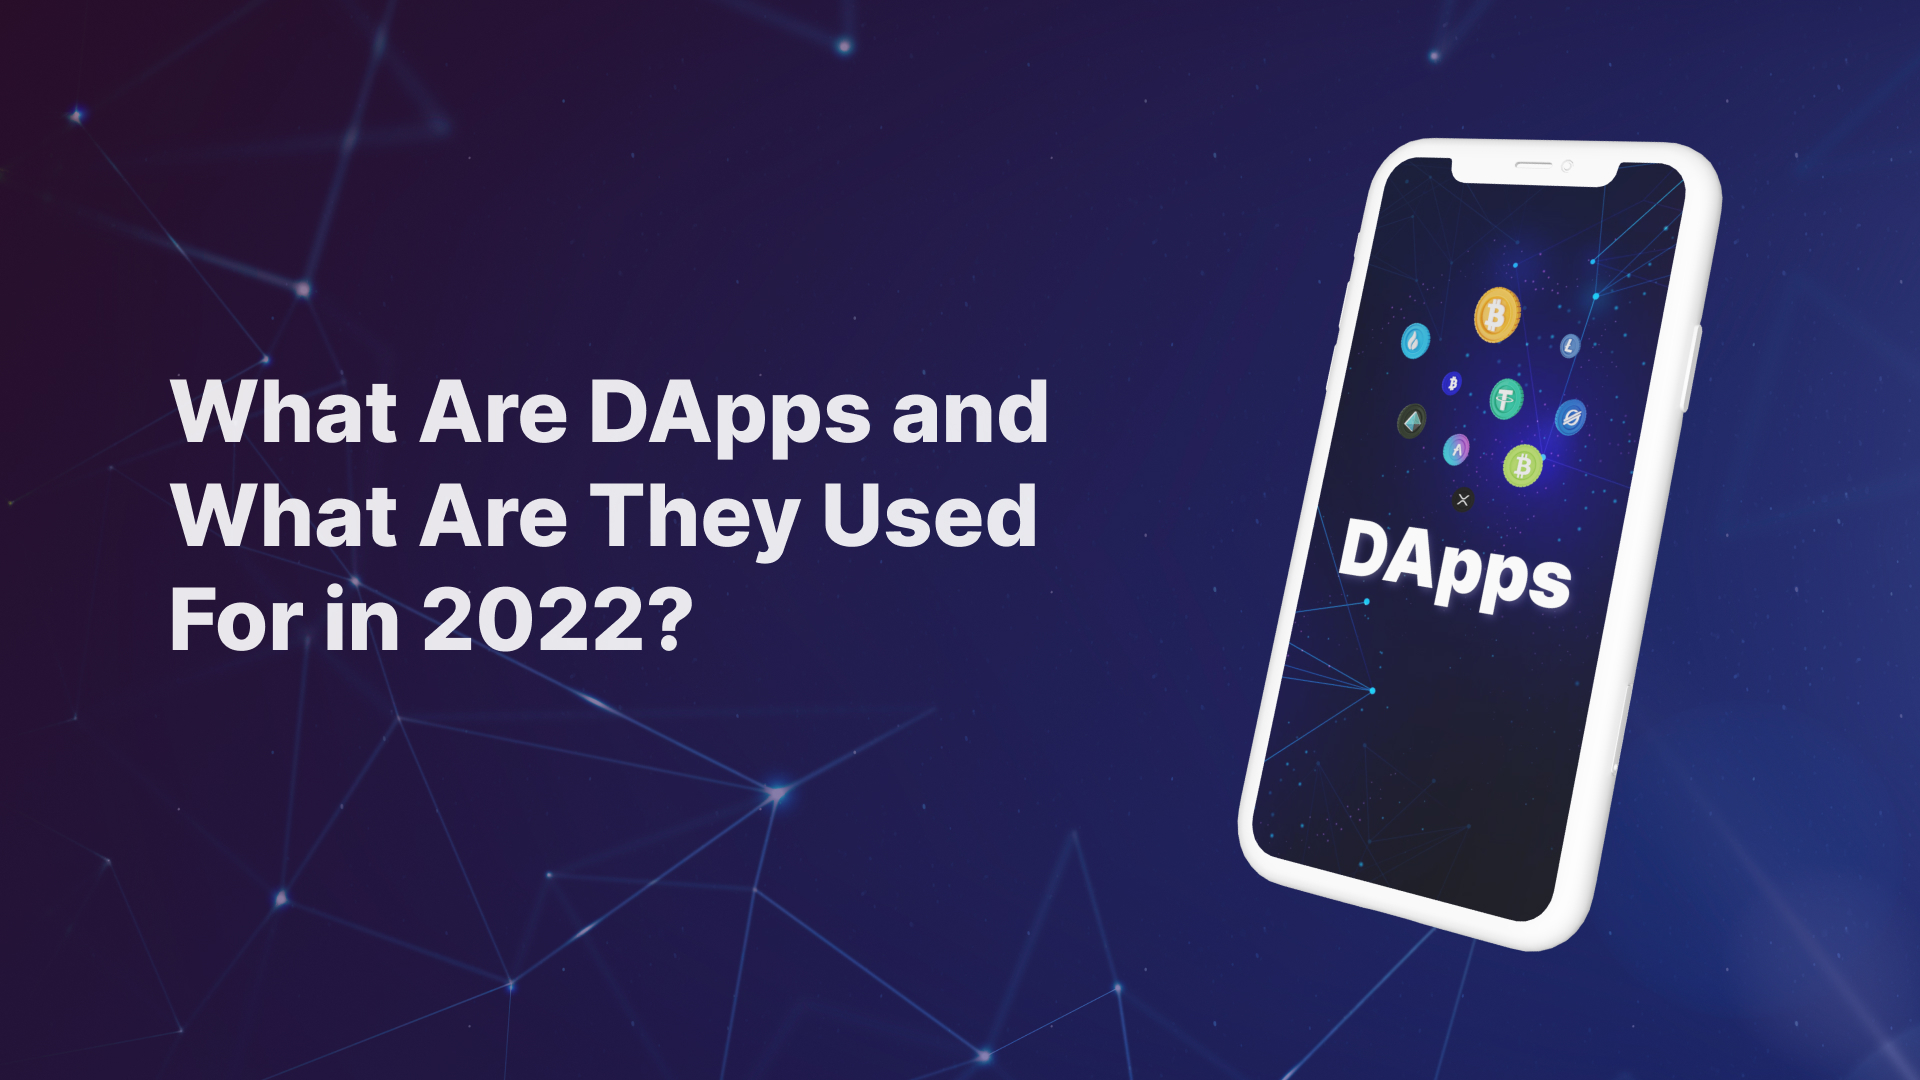 What Are DApps and What Are They Used For in 2023?